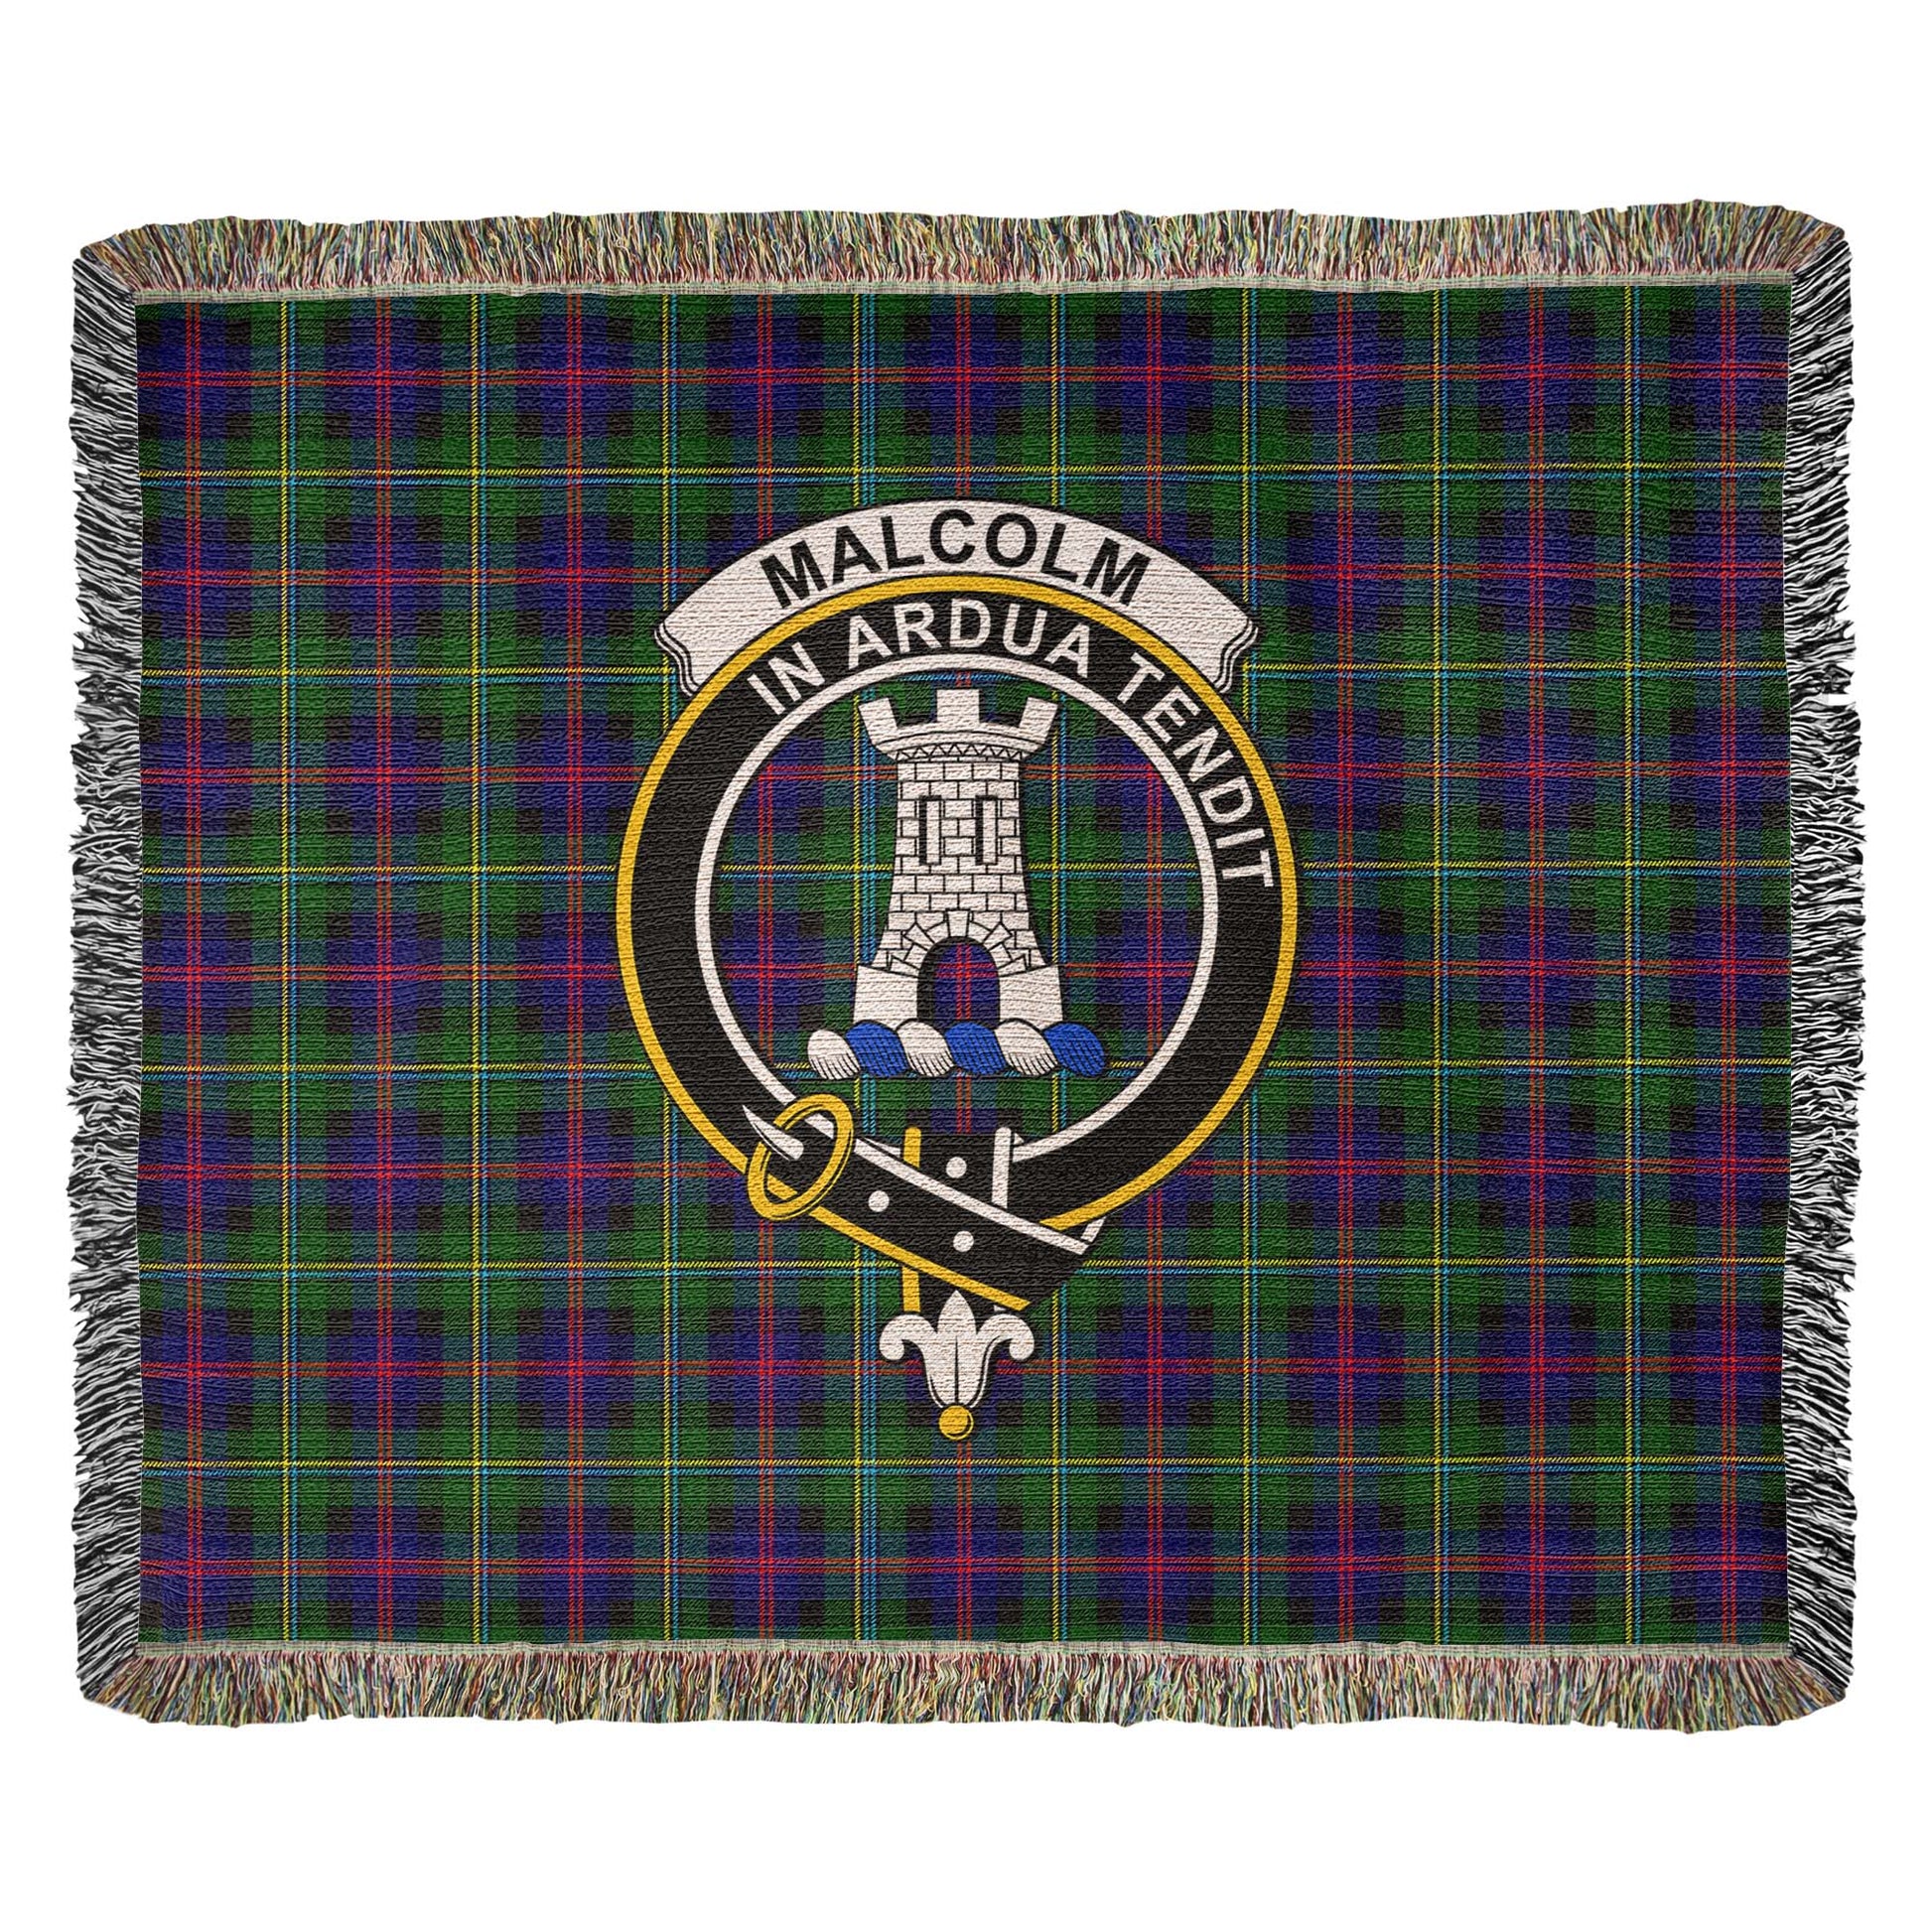 Tartan Vibes Clothing Malcolm Tartan Woven Blanket with Family Crest